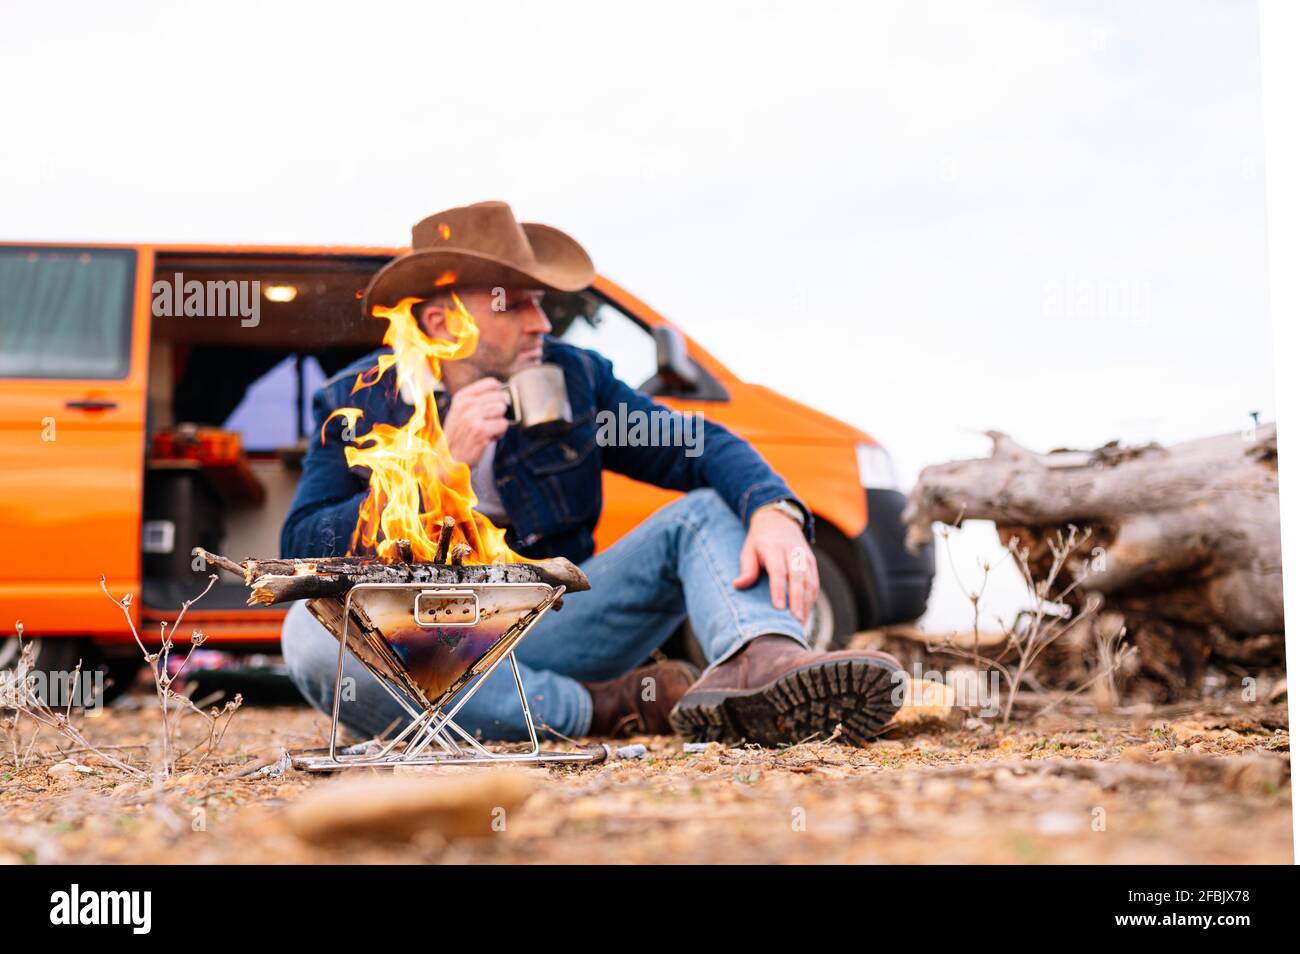 https://c8.alamy.com/comp/2FBJX78/mature-man-having-coffee-while-sitting-in-front-of-camping-stove-2FBJX78.jpg